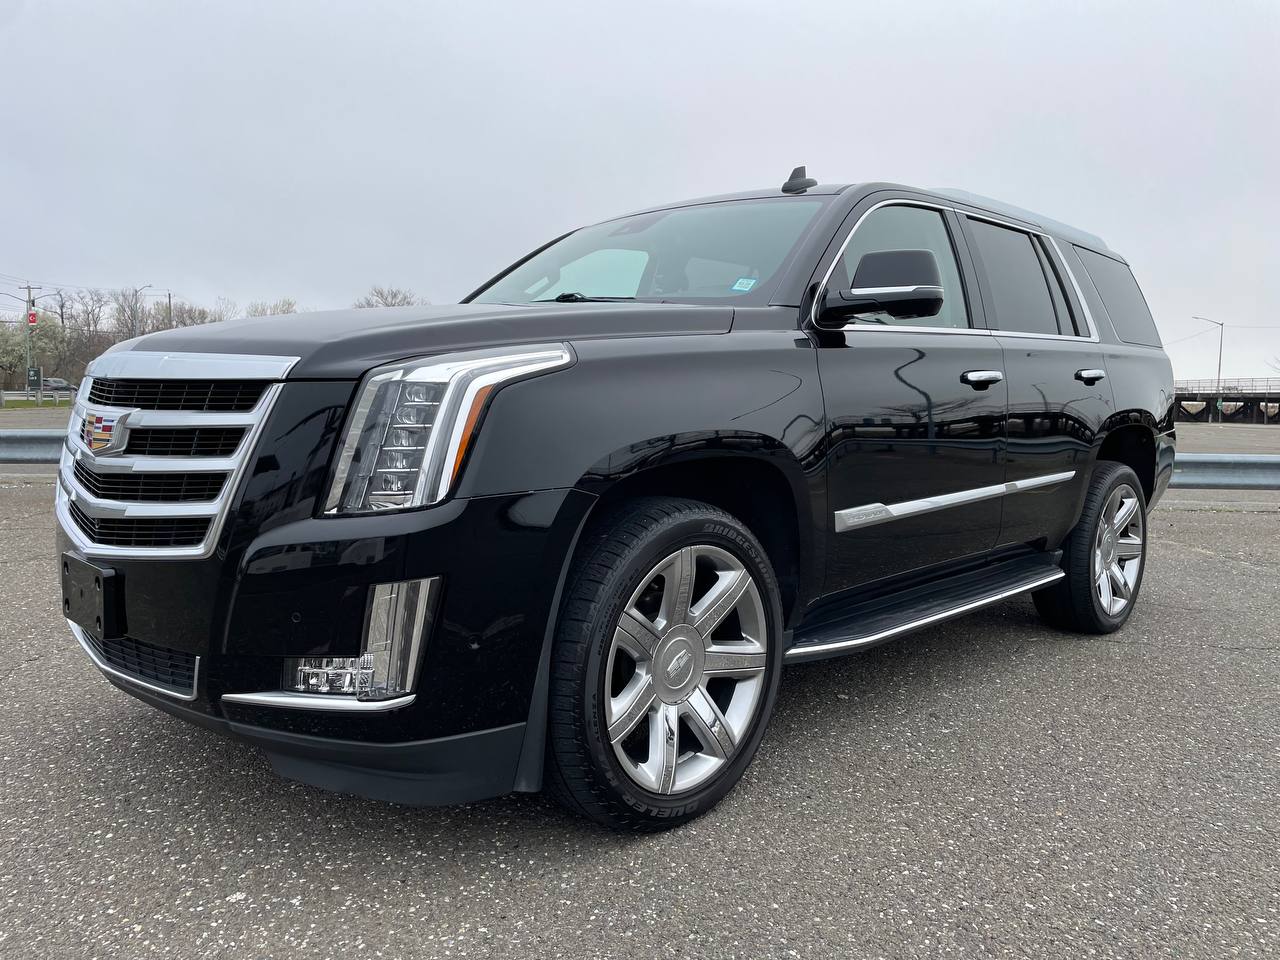 Used Car - 2020 Cadillac Escalade for Sale in Staten Island, NY